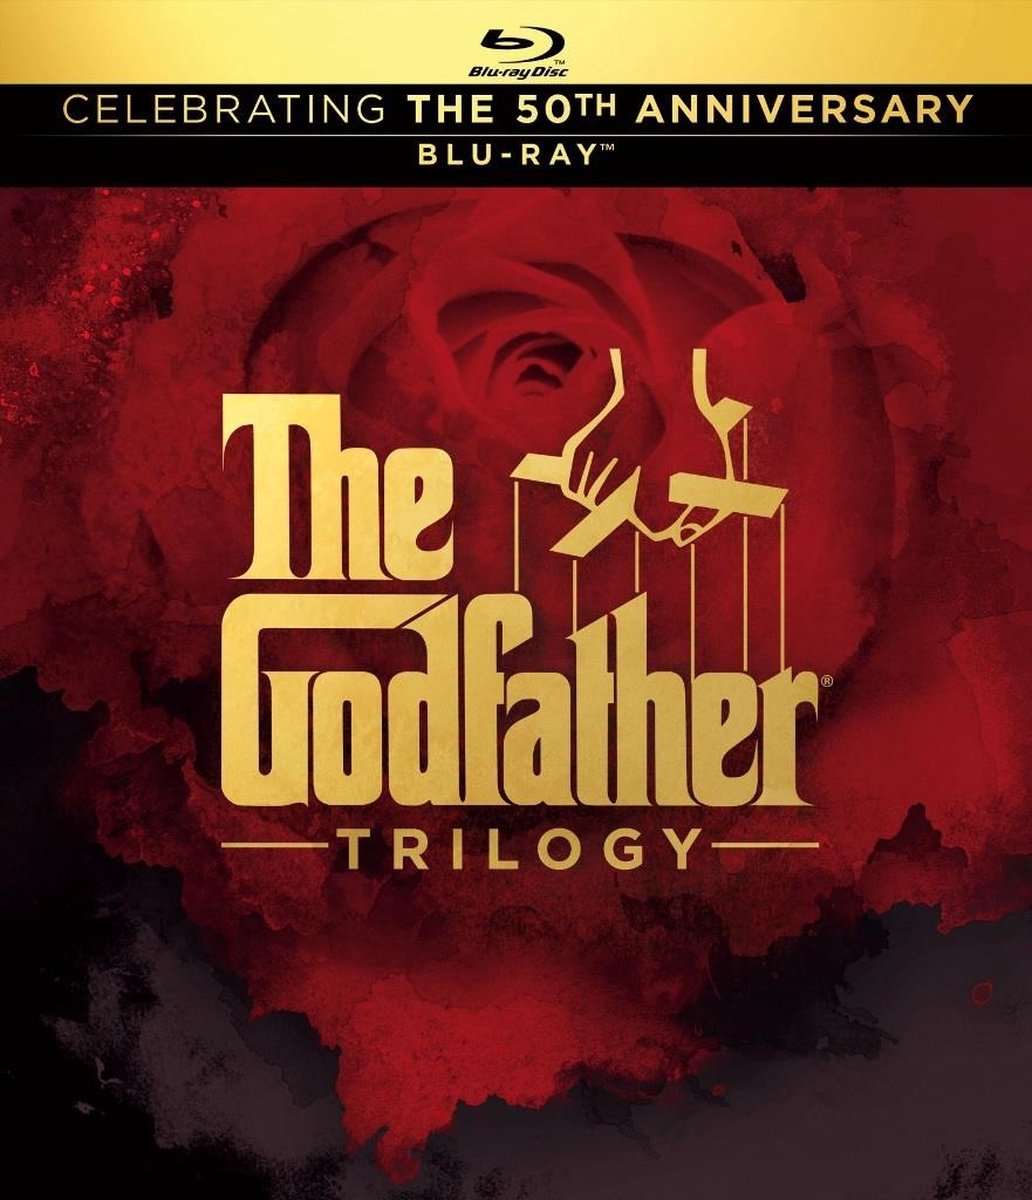 Godfather Trilogy (50th Anniversary Edition) (Blu-ray), Francis Ford Coppola